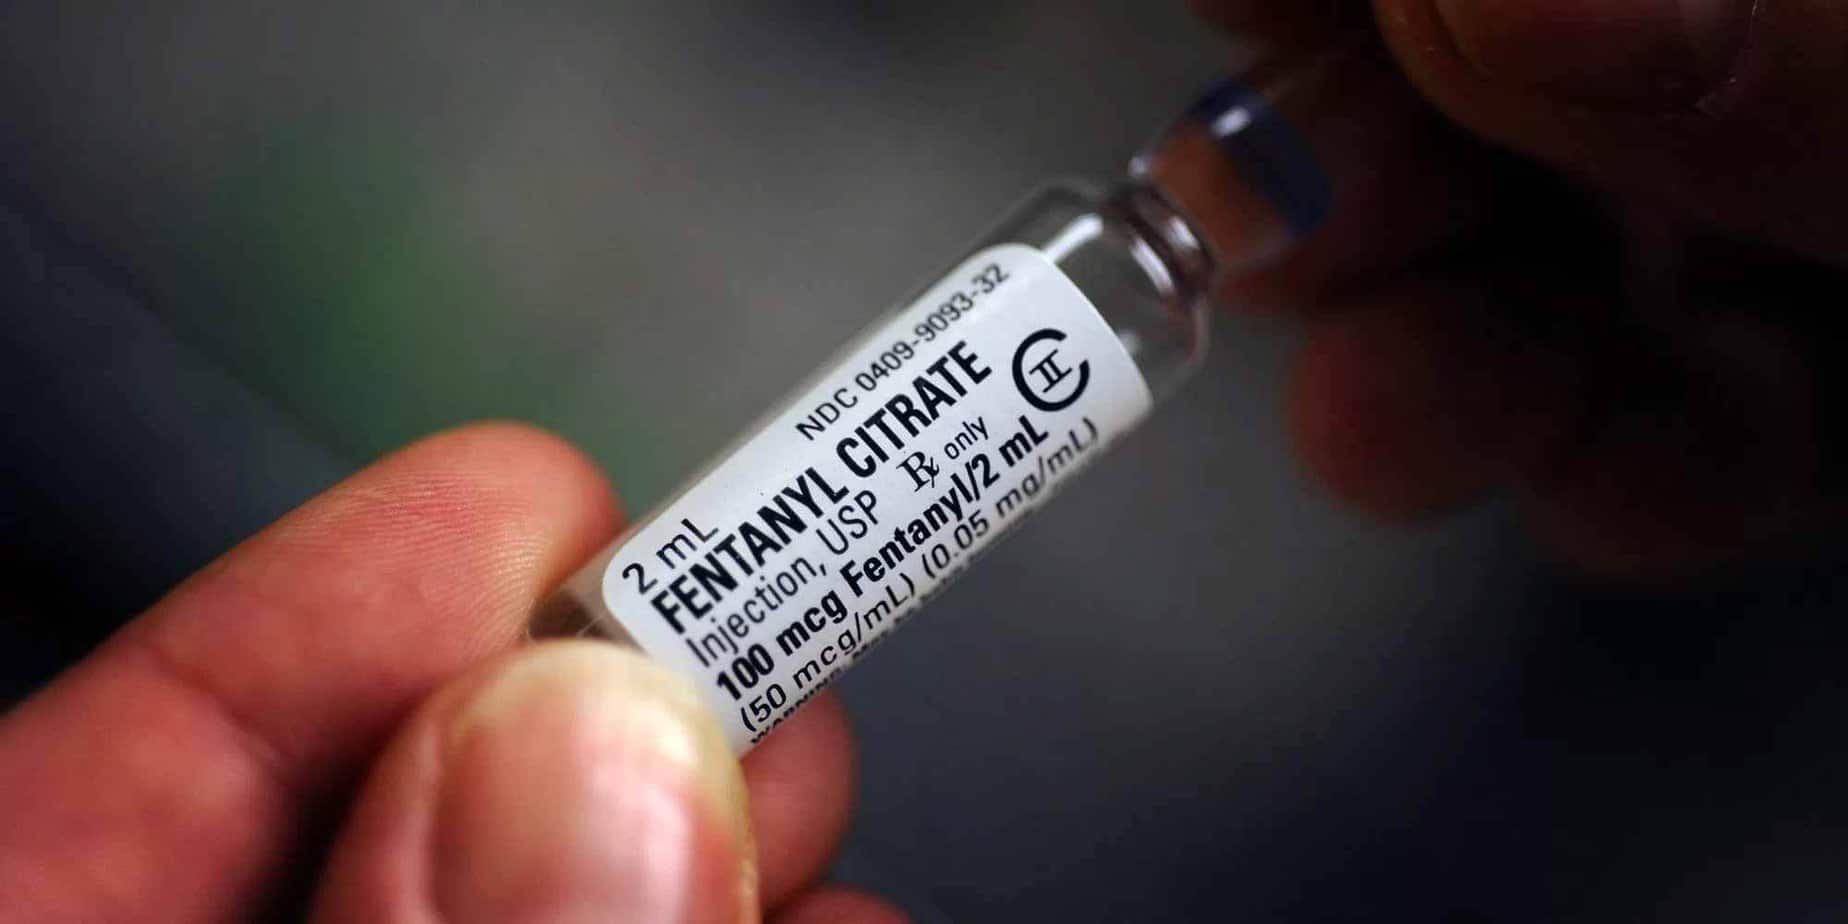 Fentanyl 101: What You Need to Know